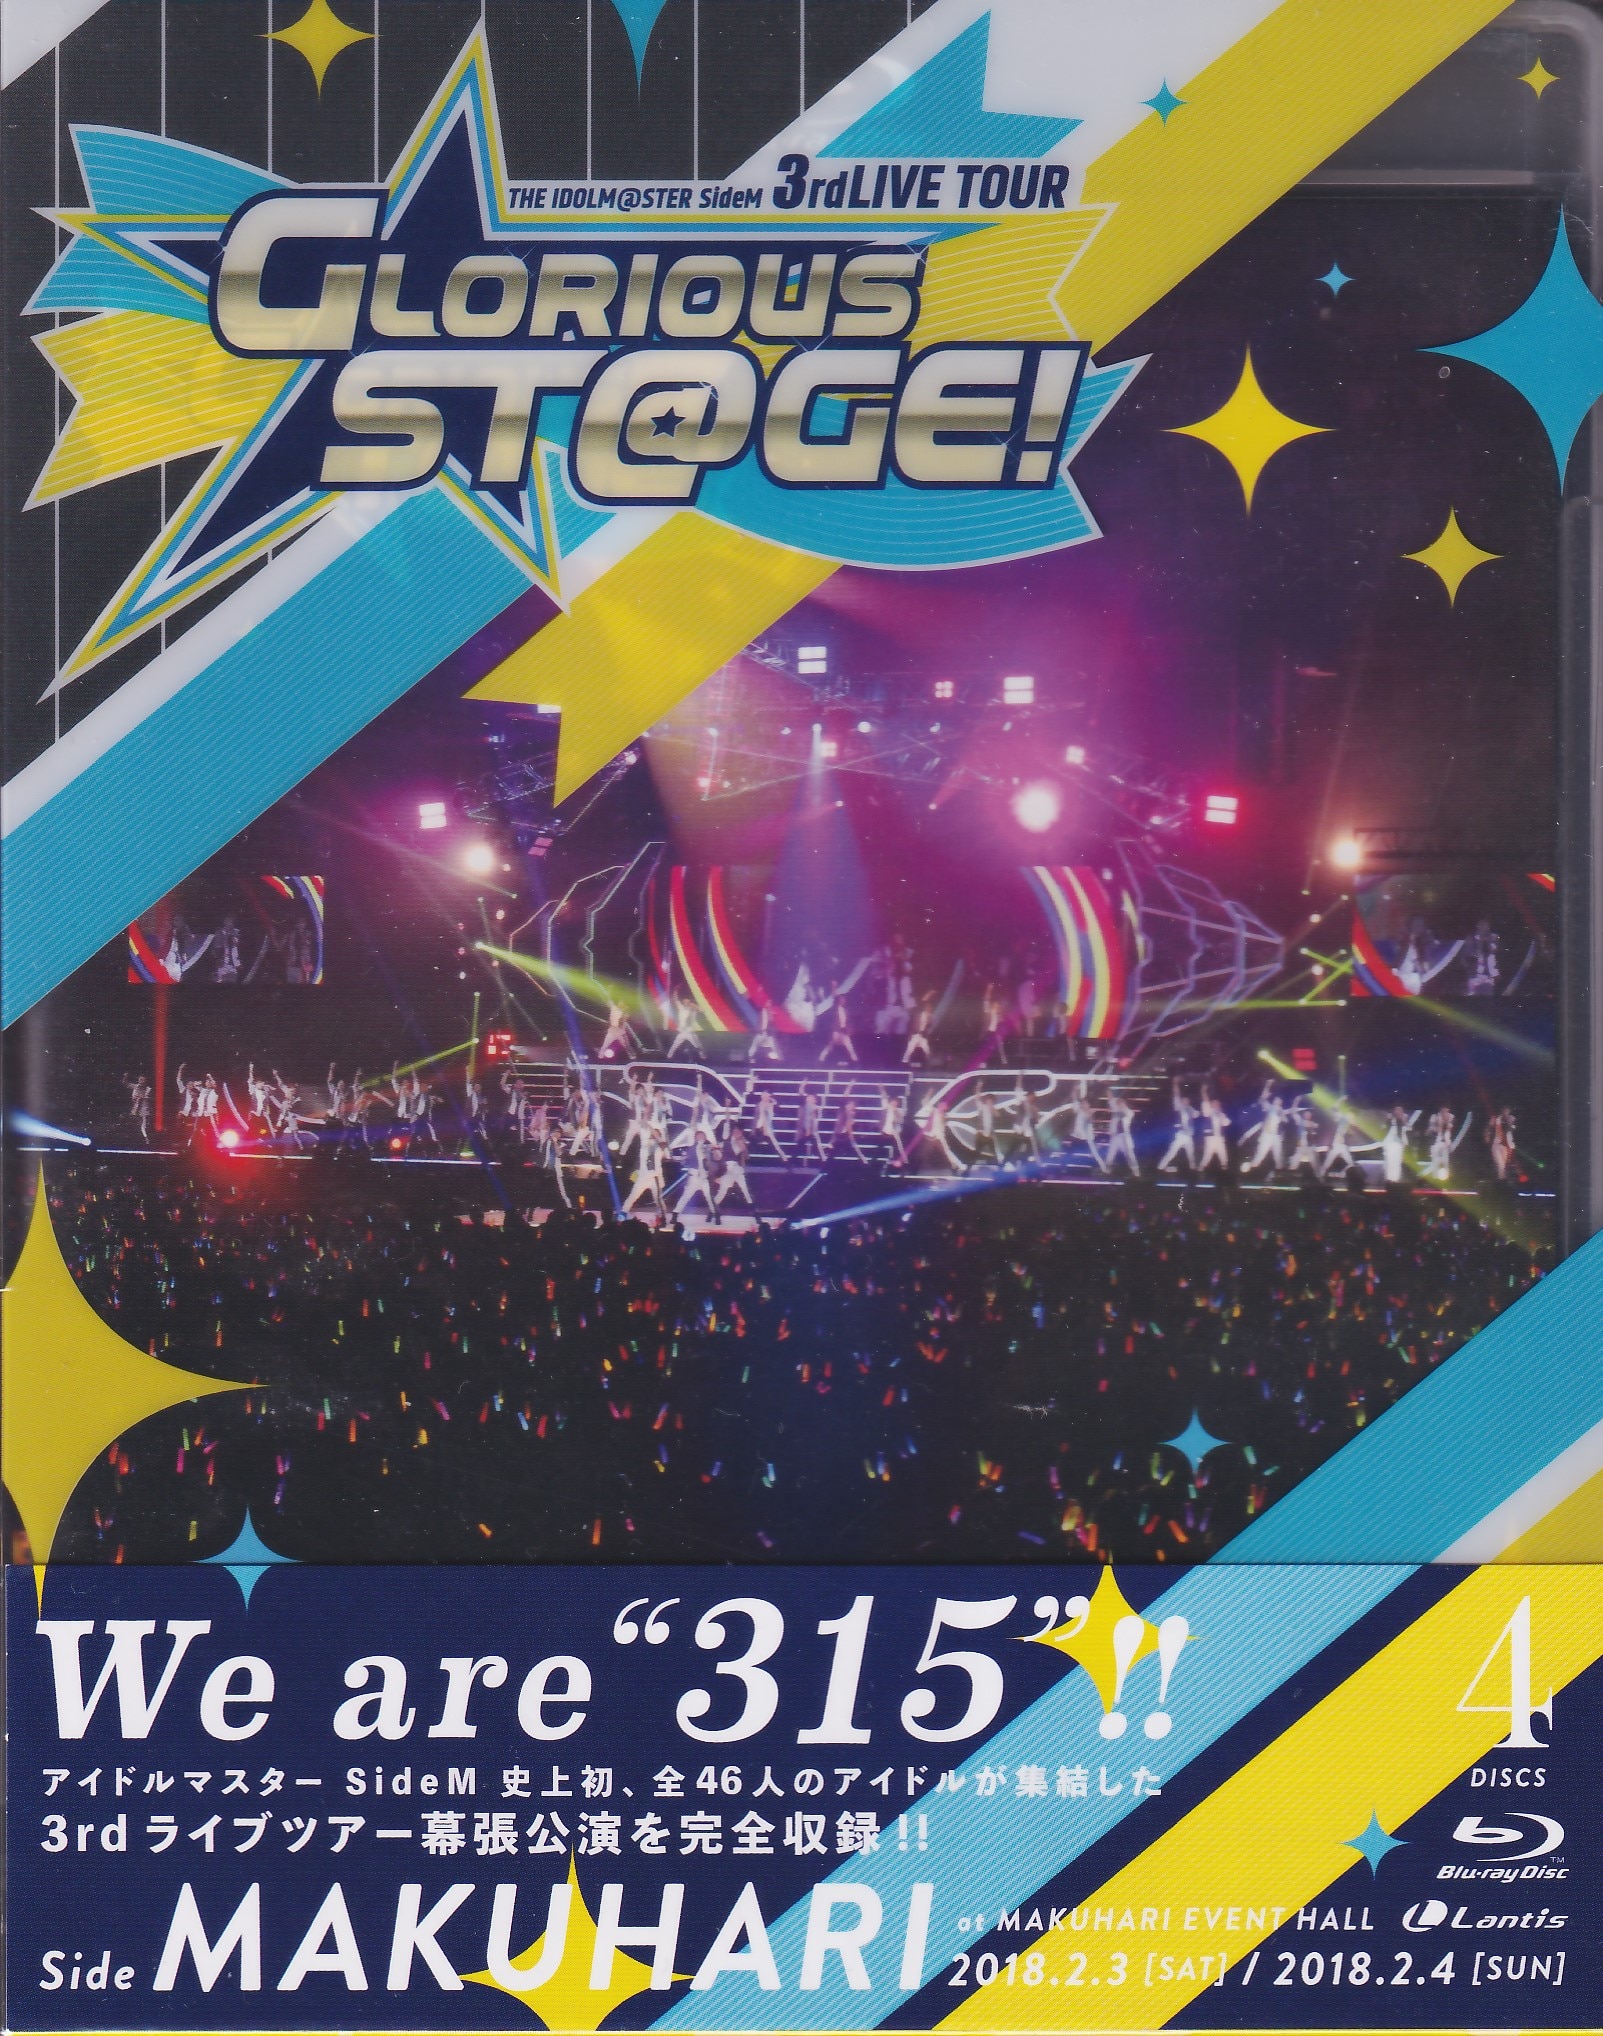 Live-Ray Blu The Idolmaster (idolm@ster) SideM 3rd Live Tour Glorious Stage  (St@ge) ! Side MAKUHARI